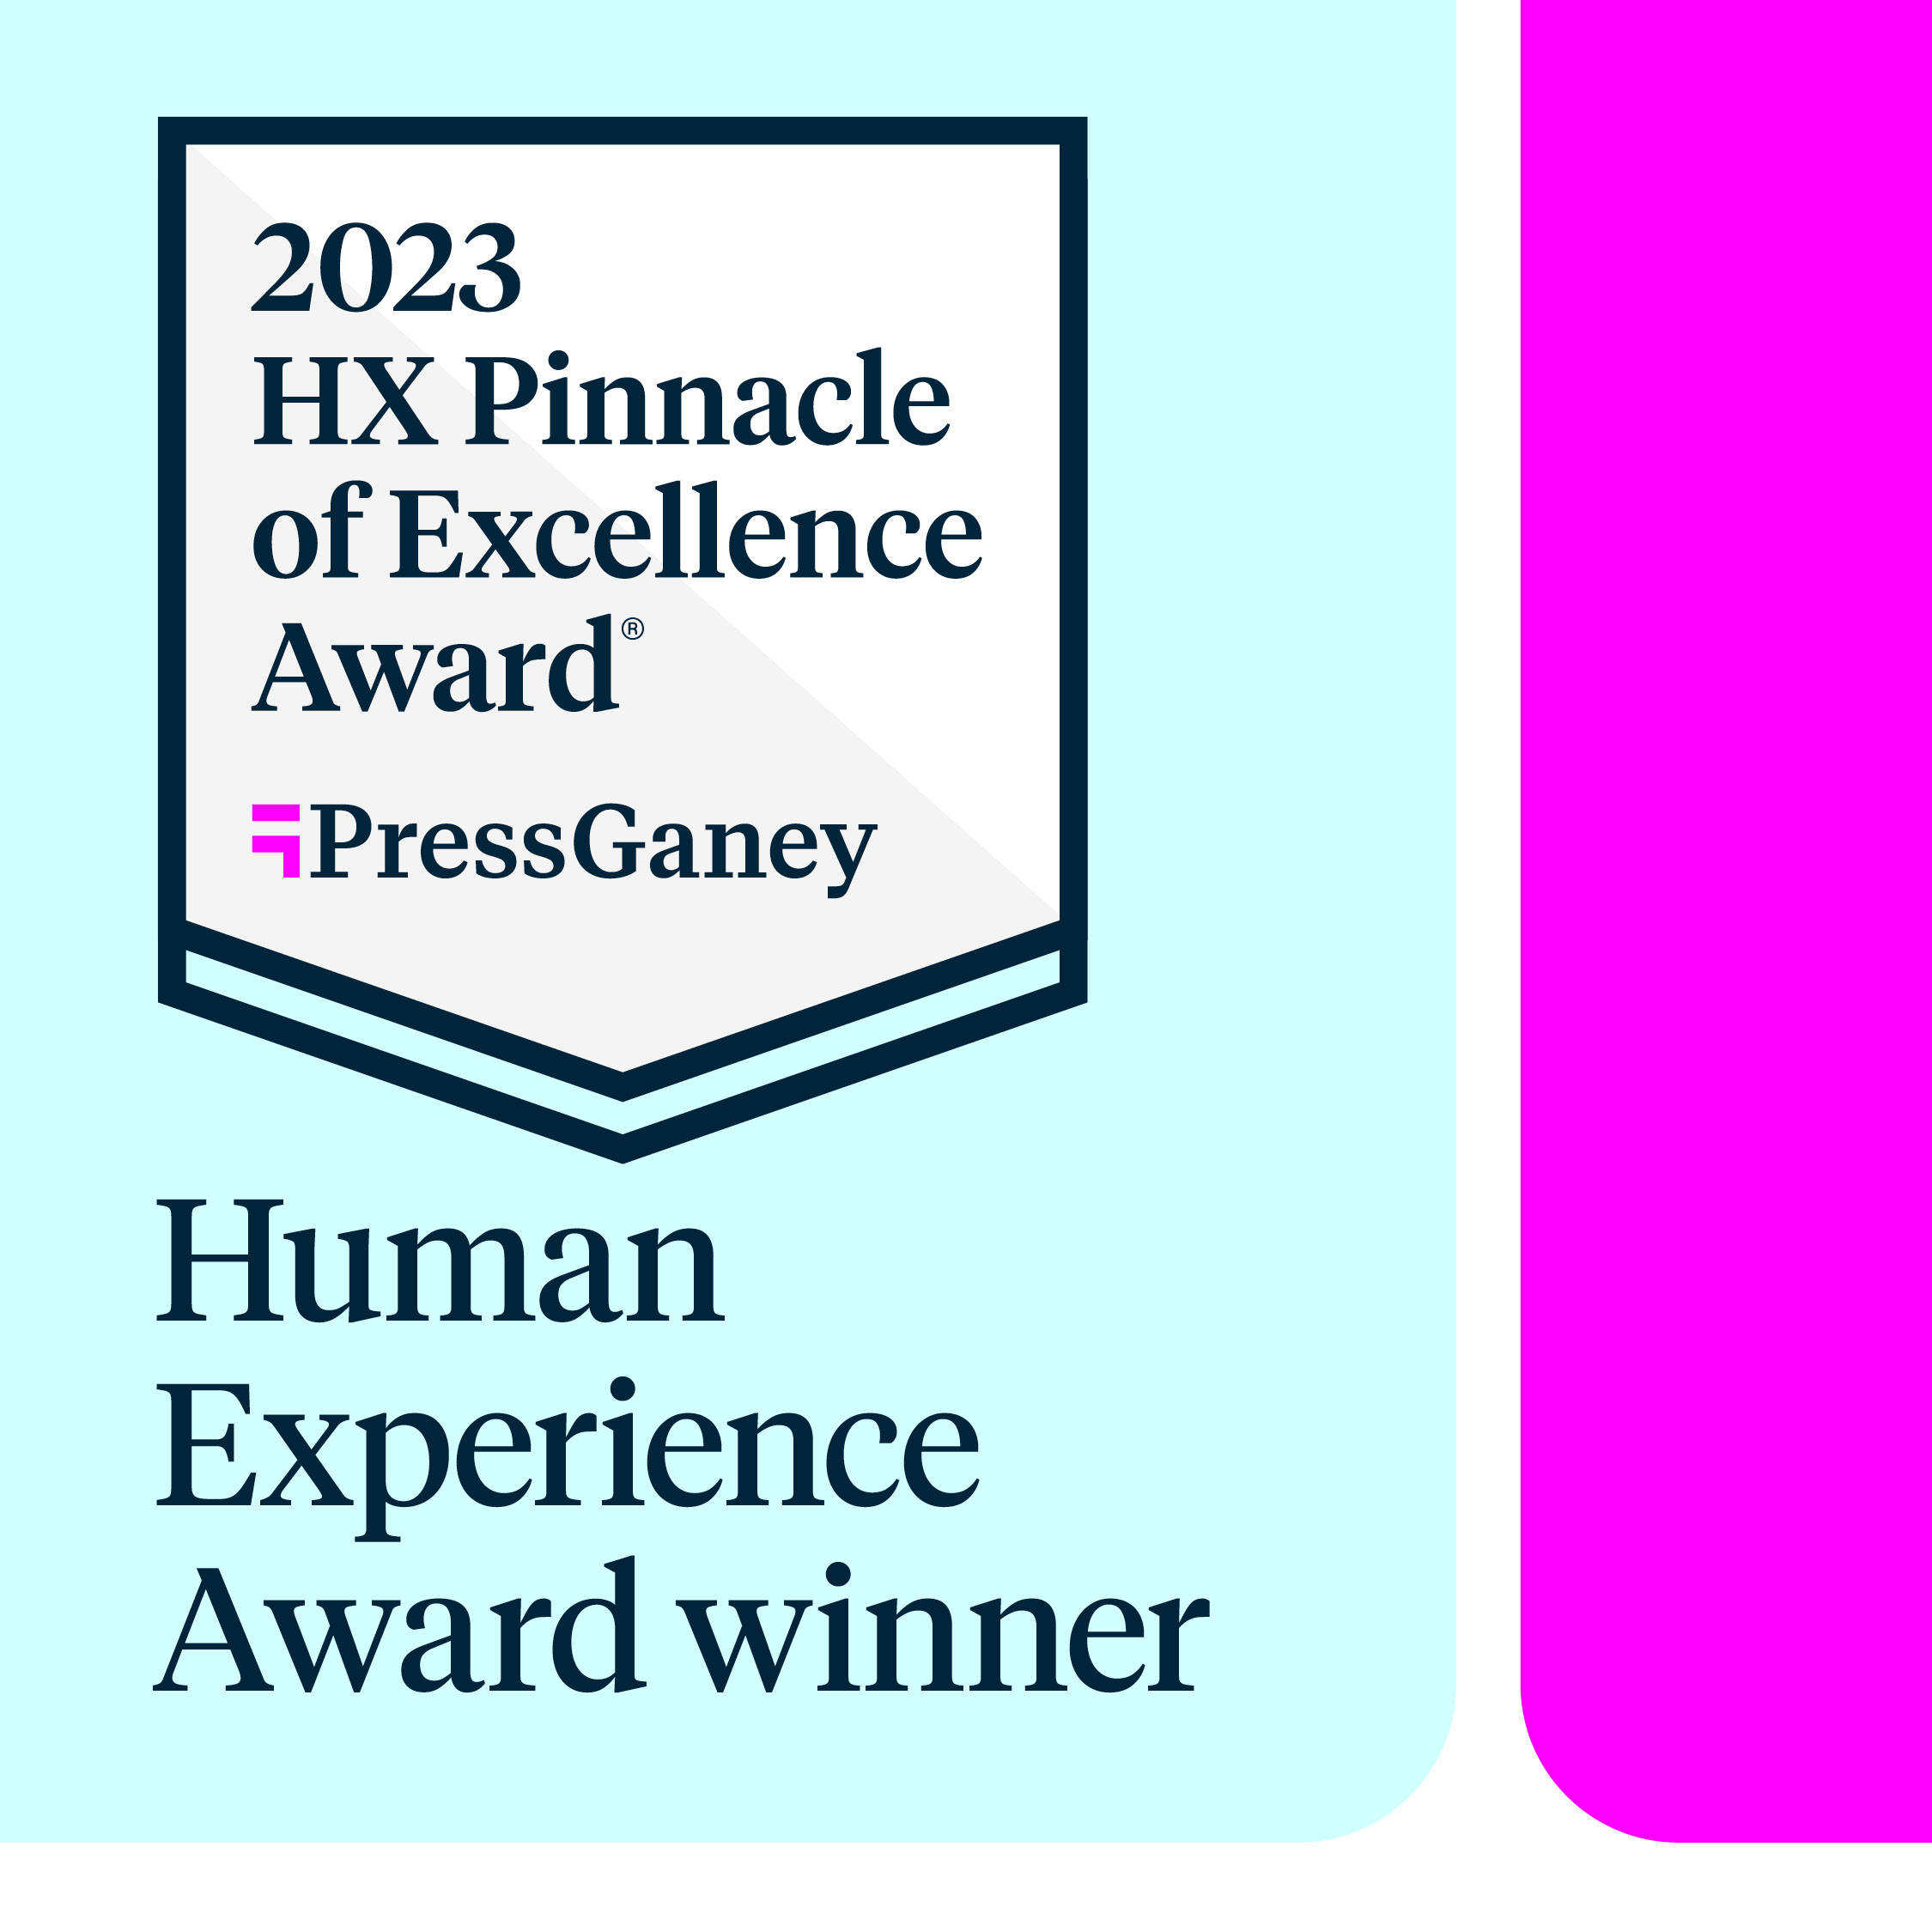 Press Ganey 2023 HX Pinnacle of Excellence Award graphic